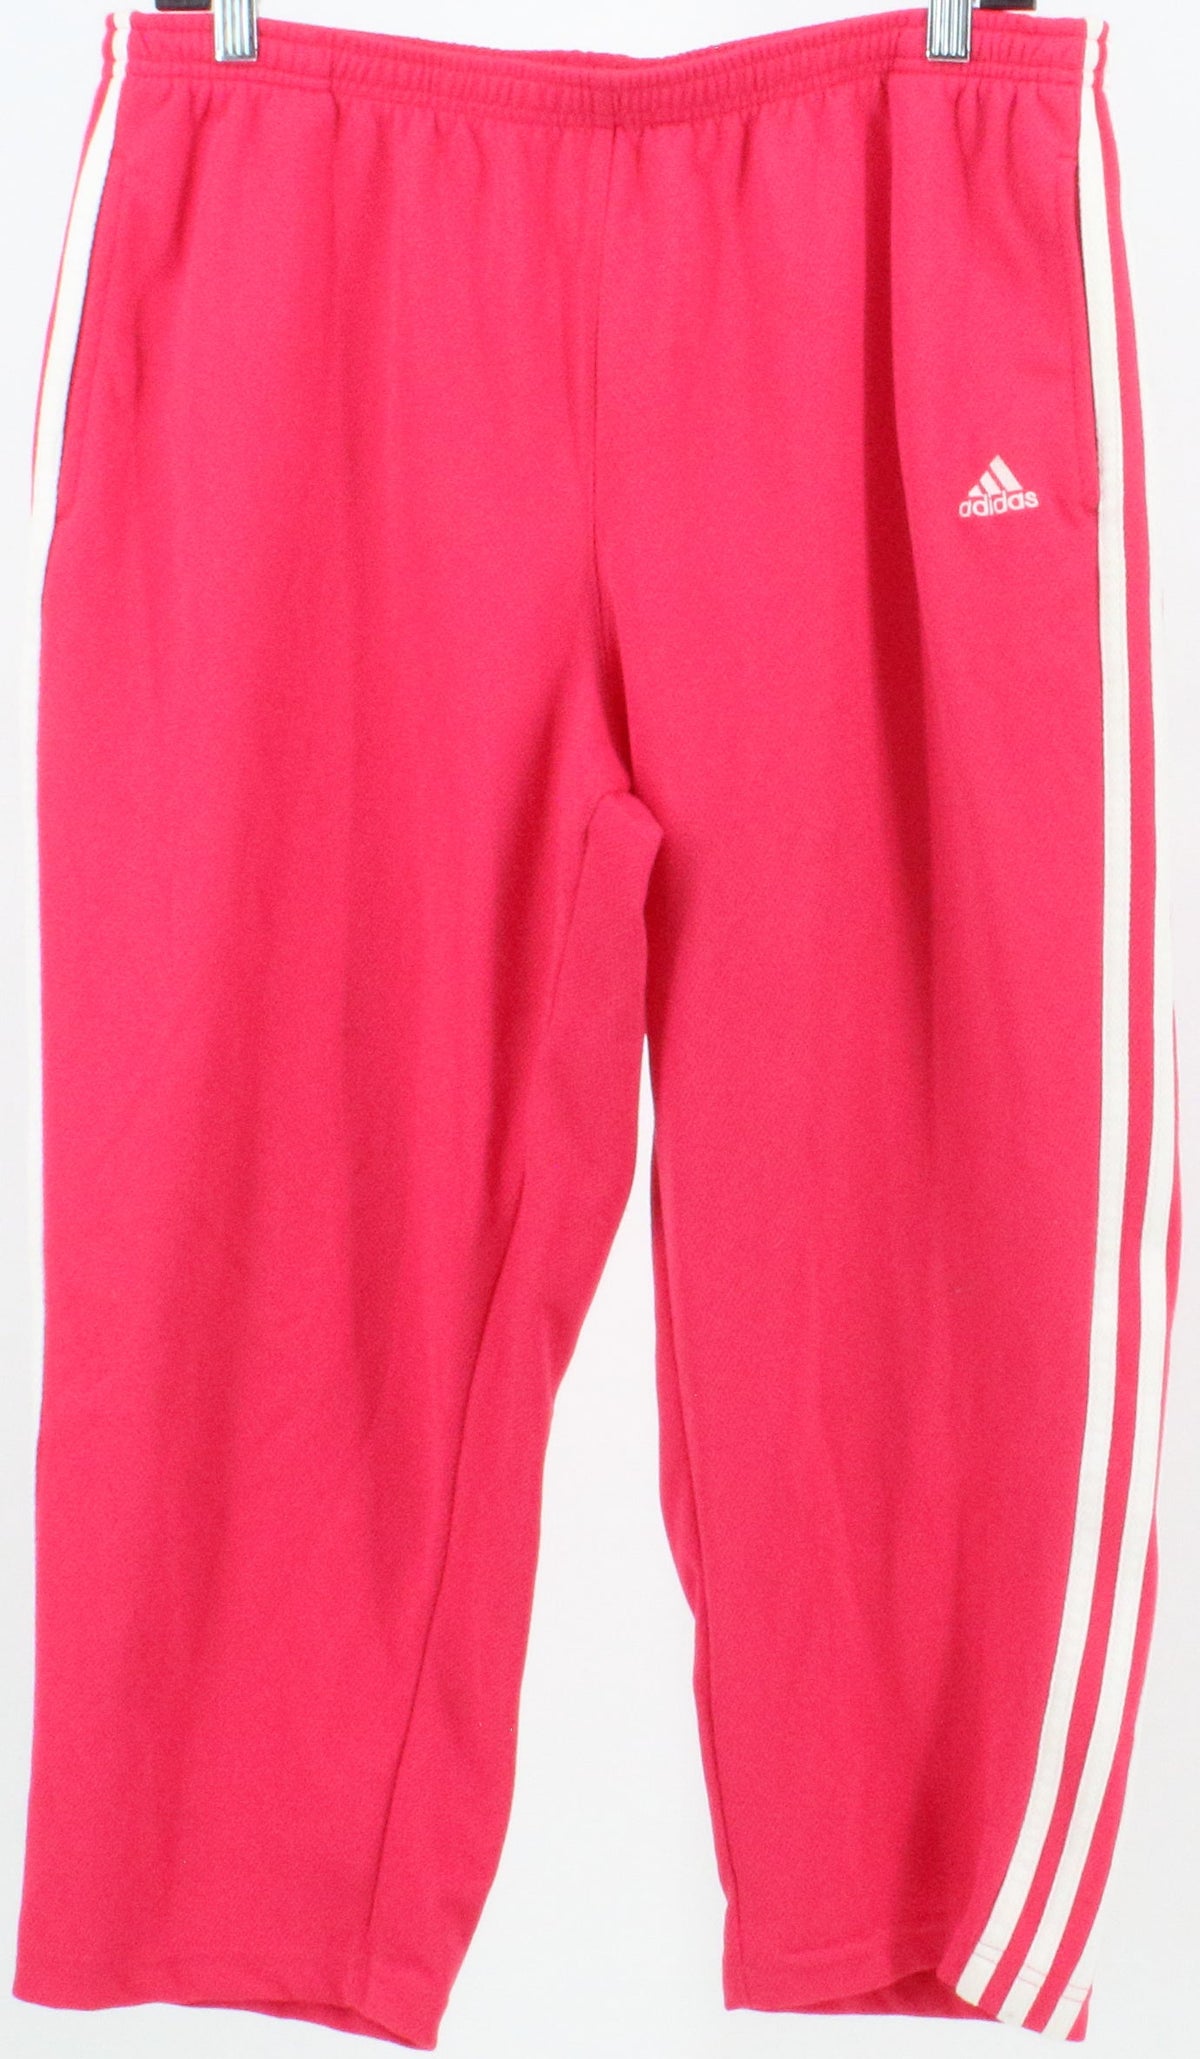 Adidas Pink and White Active Pants